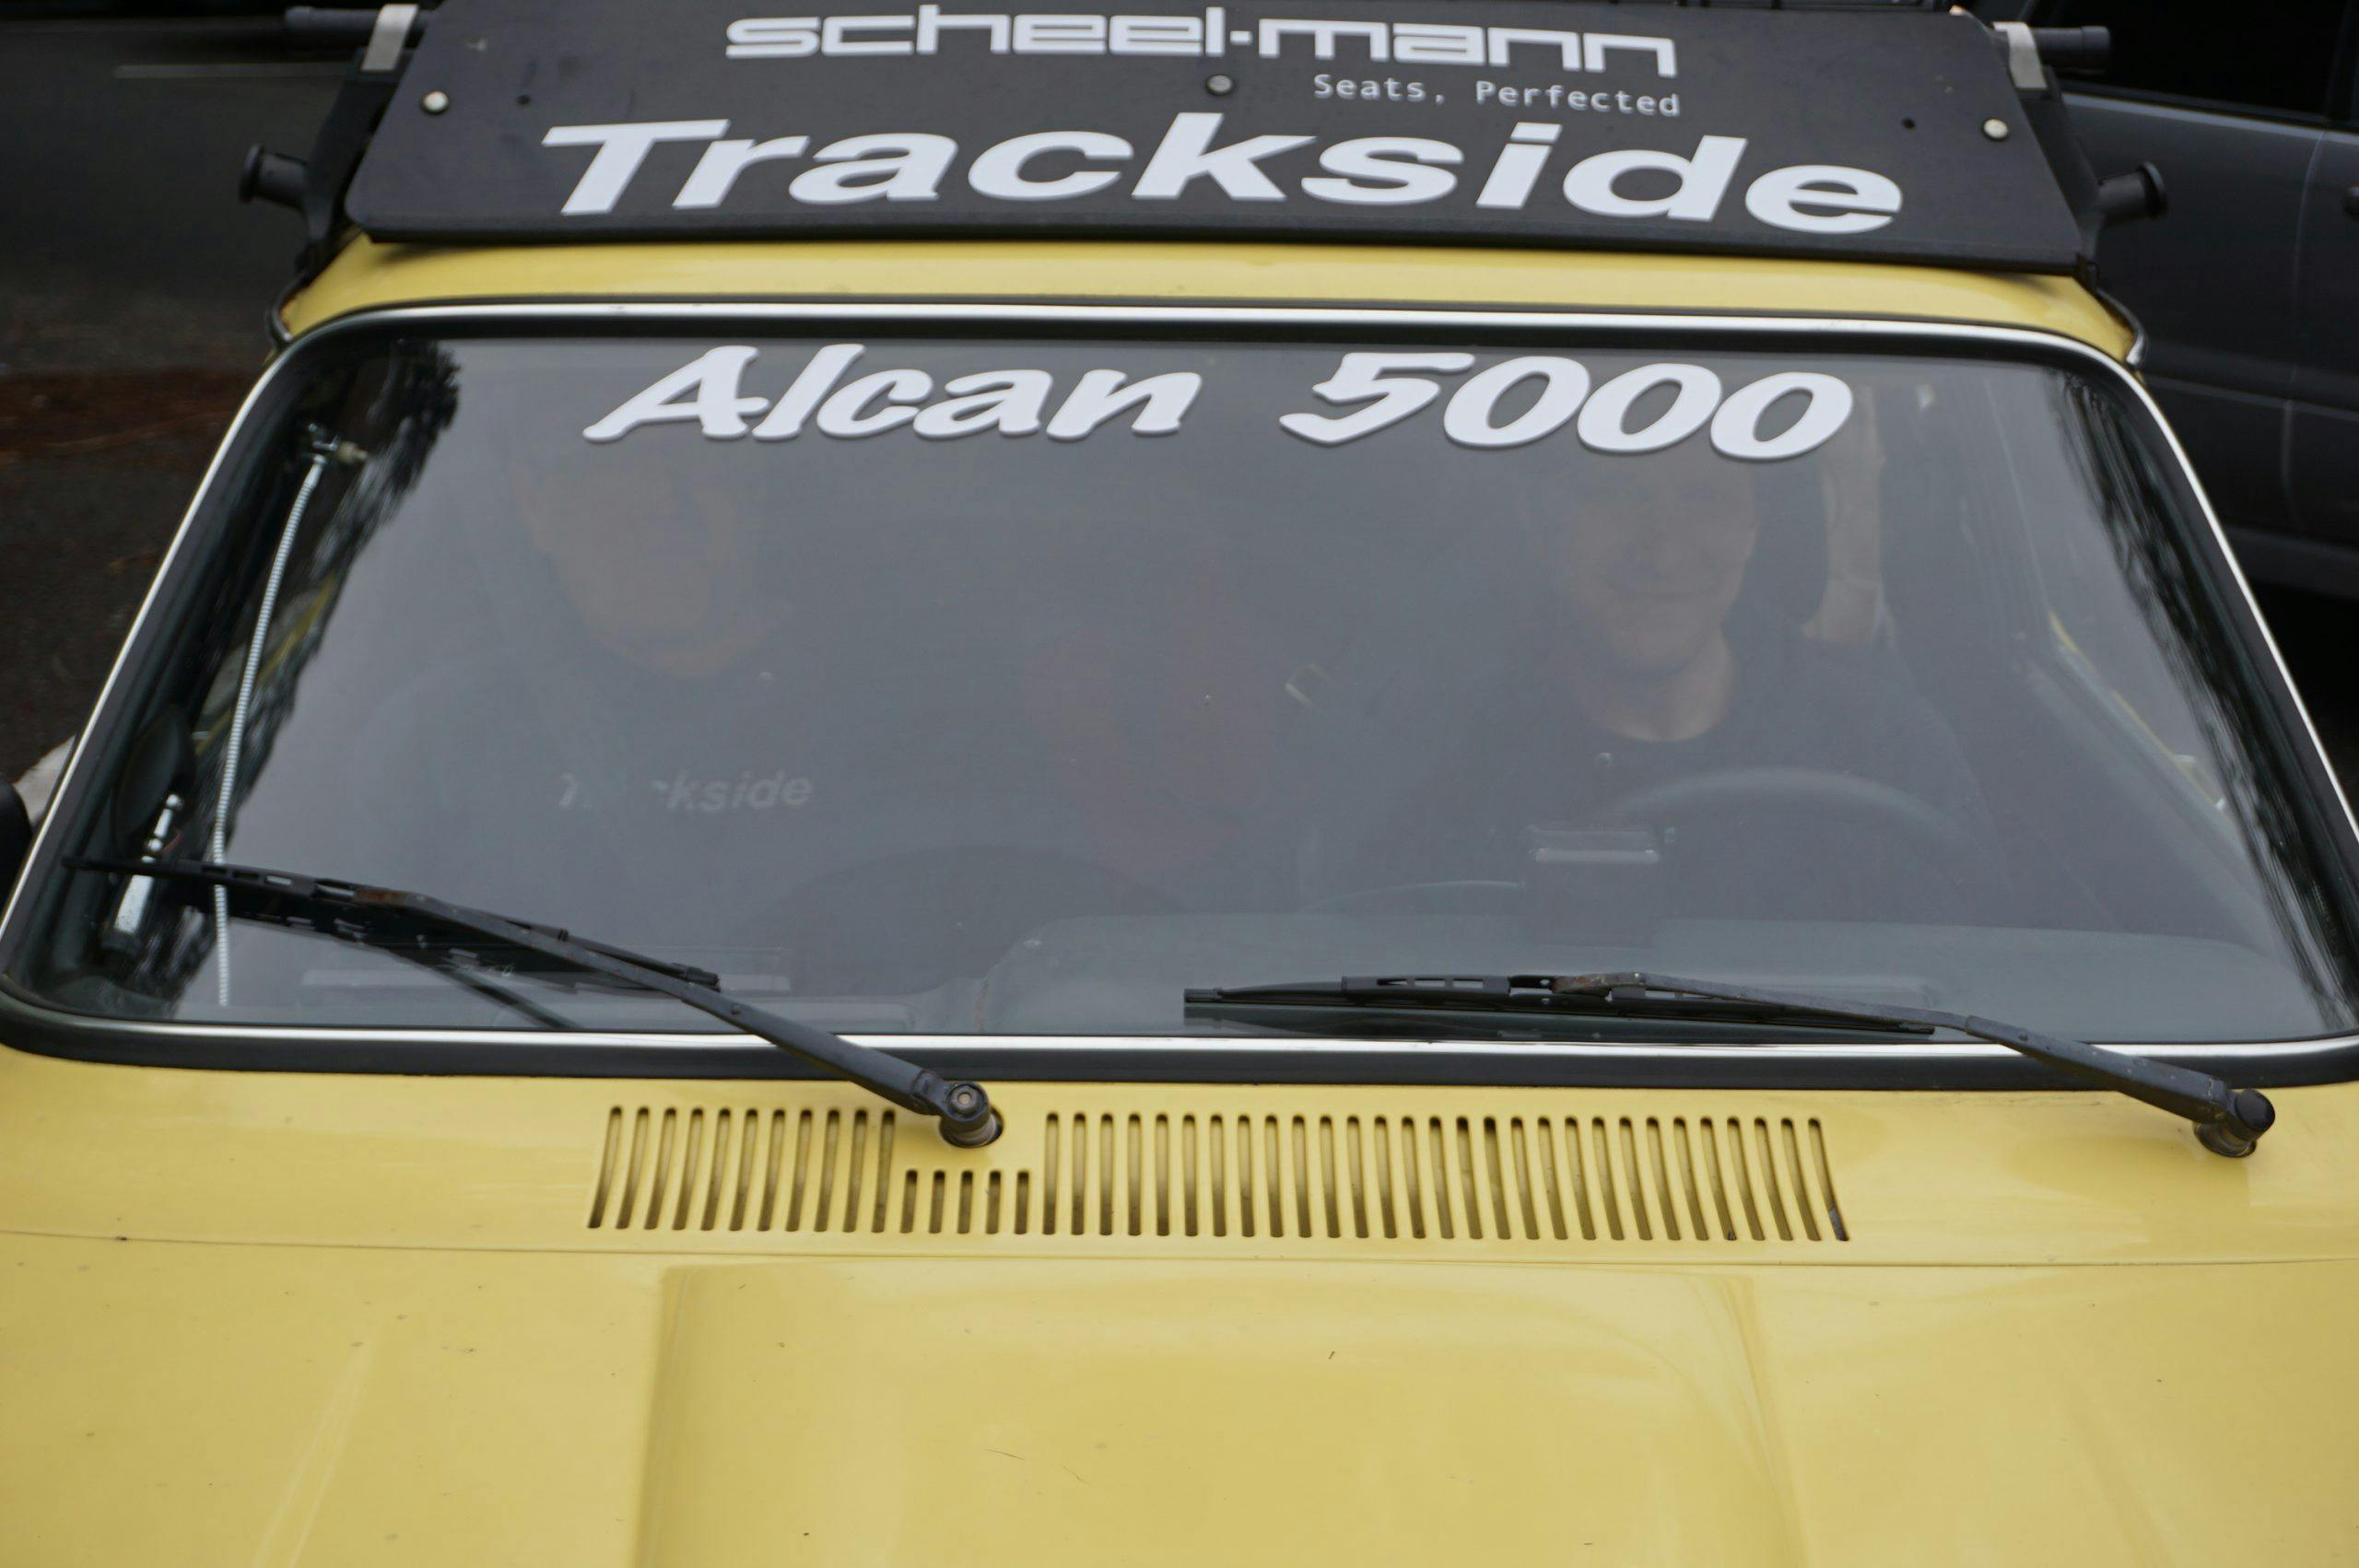 alcan 5000 rally decal on windshield